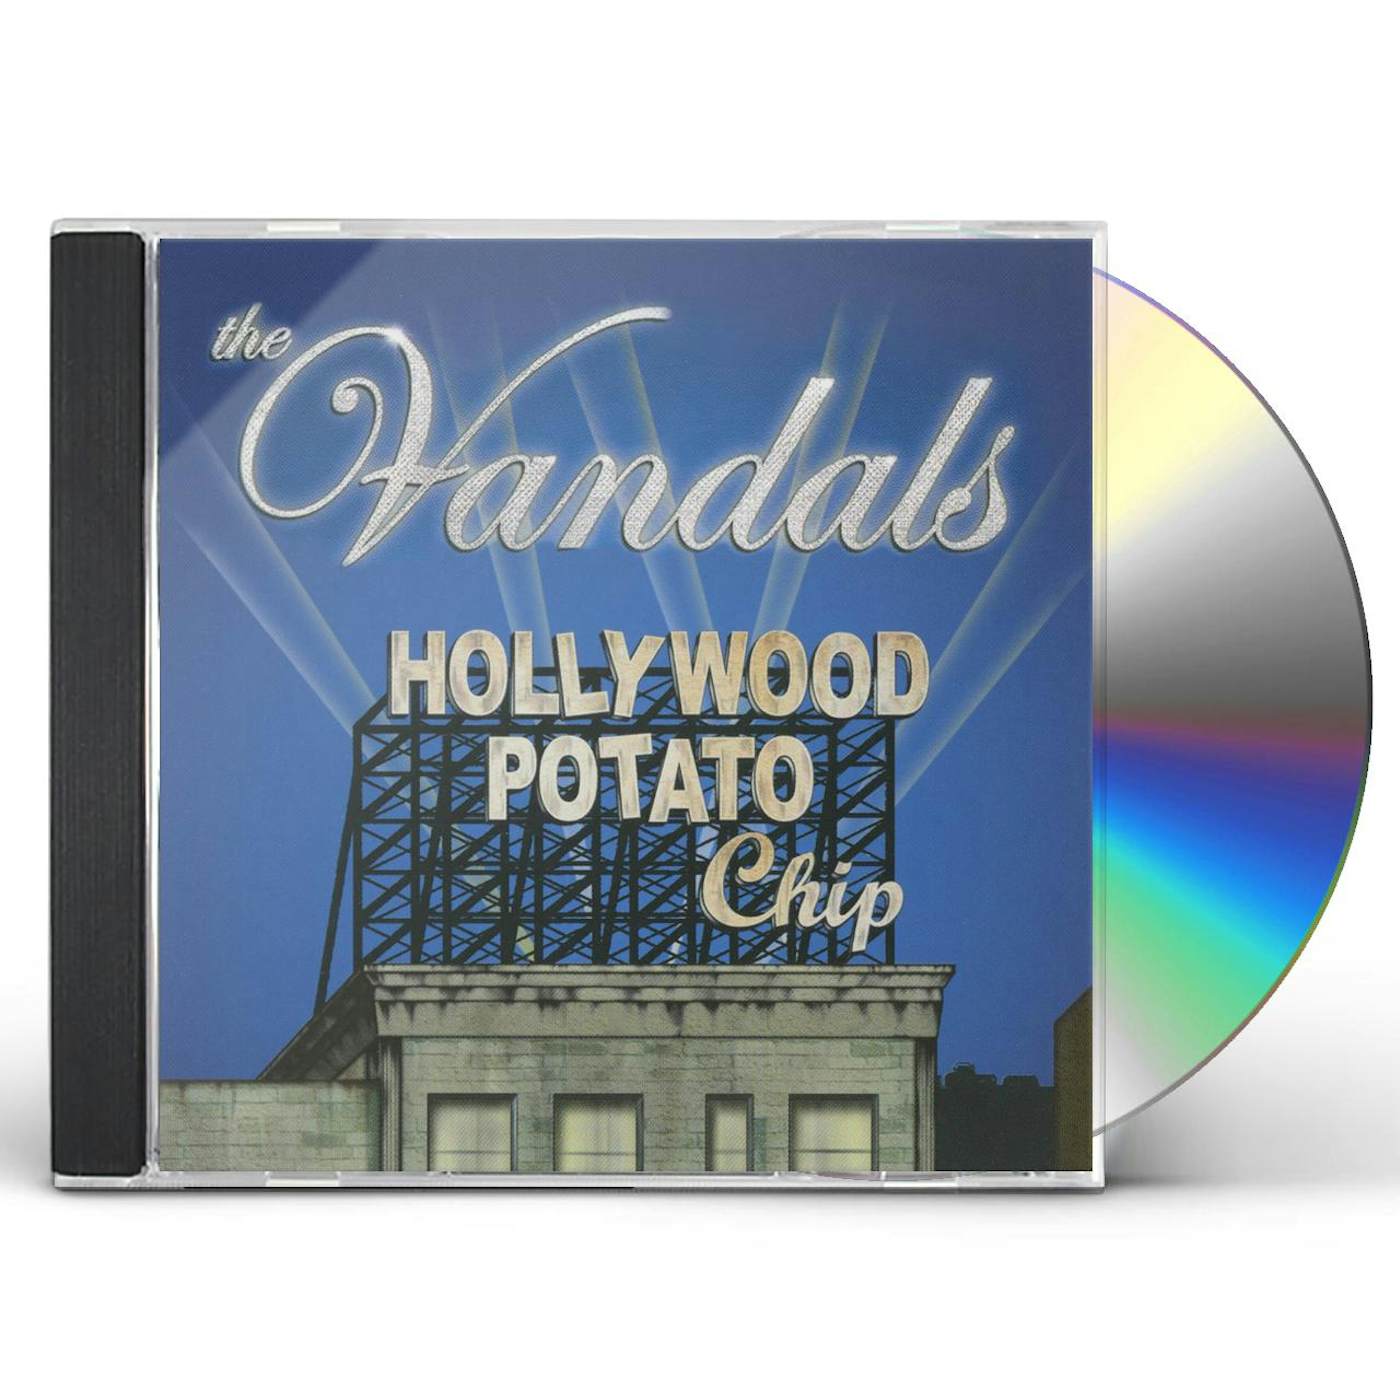 The Vandals  HOLLYWOOD POTATO CHIP CD